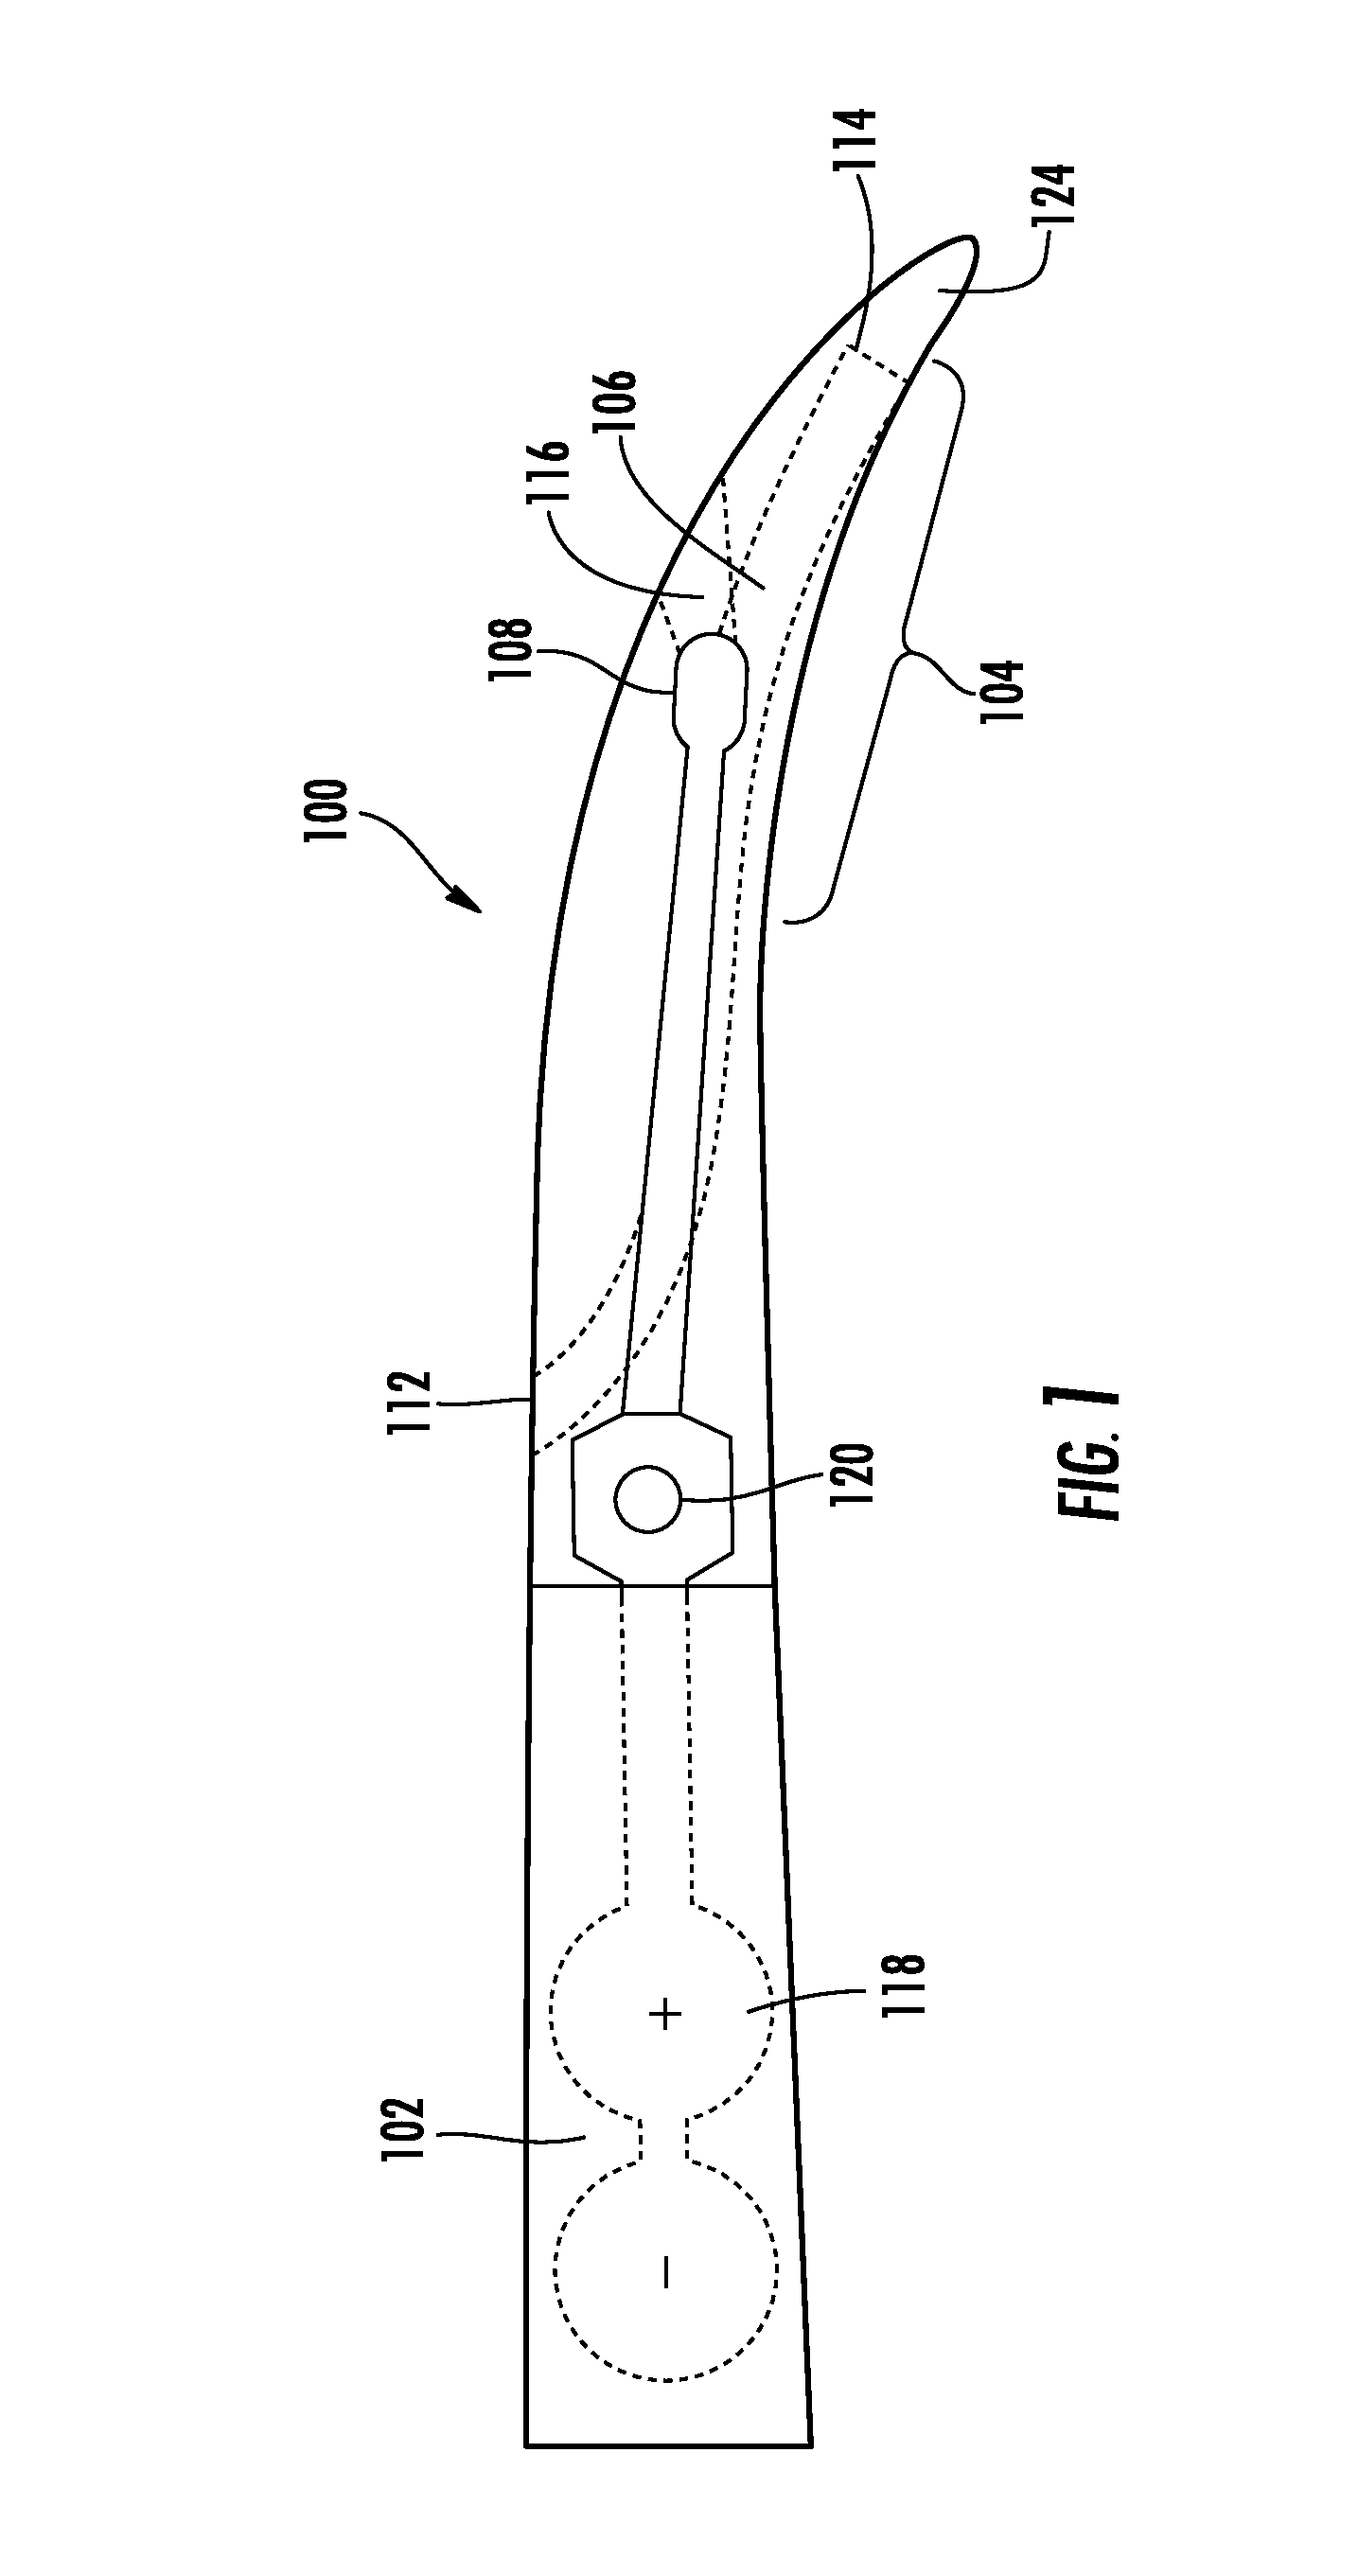 Insertion aid device